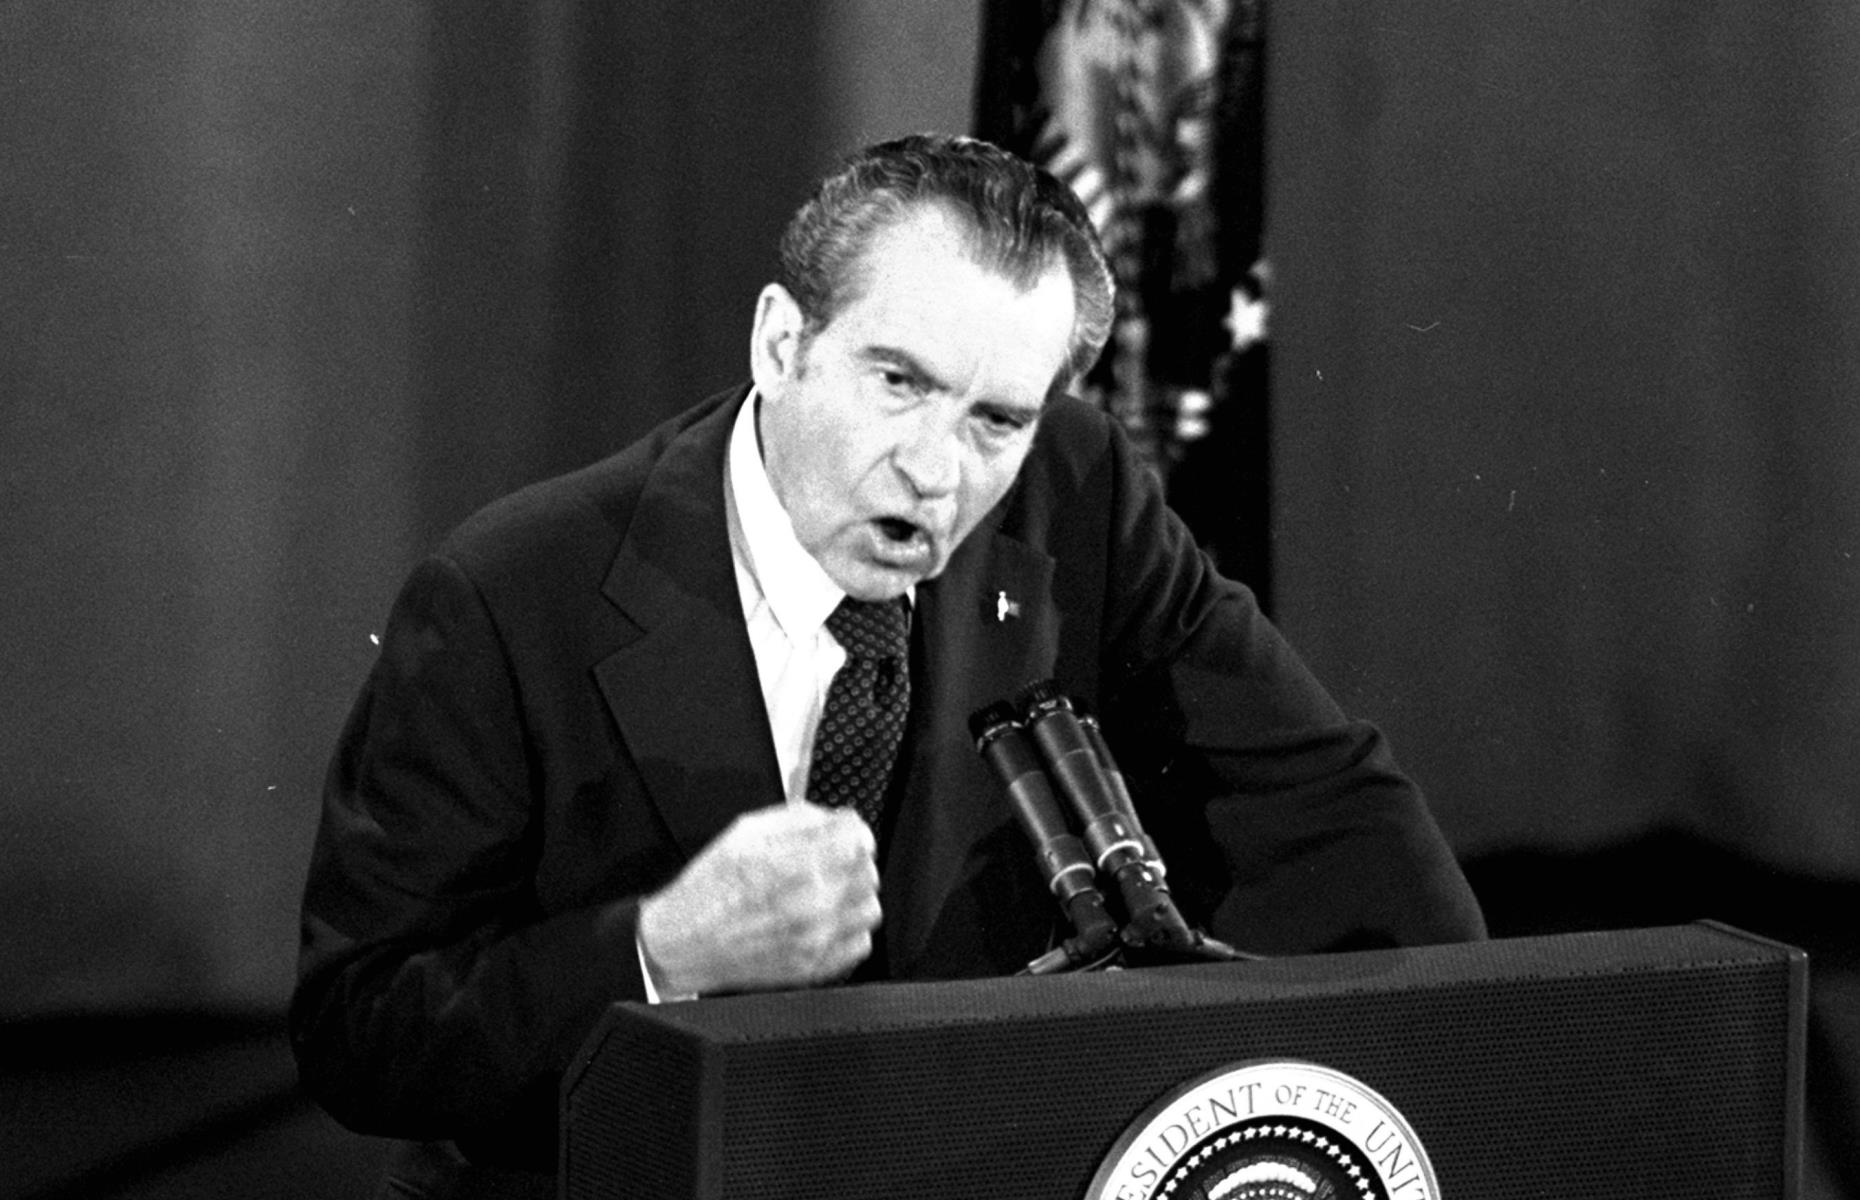 1974: Richard Nixon resigns after Watergate scandal comes to light